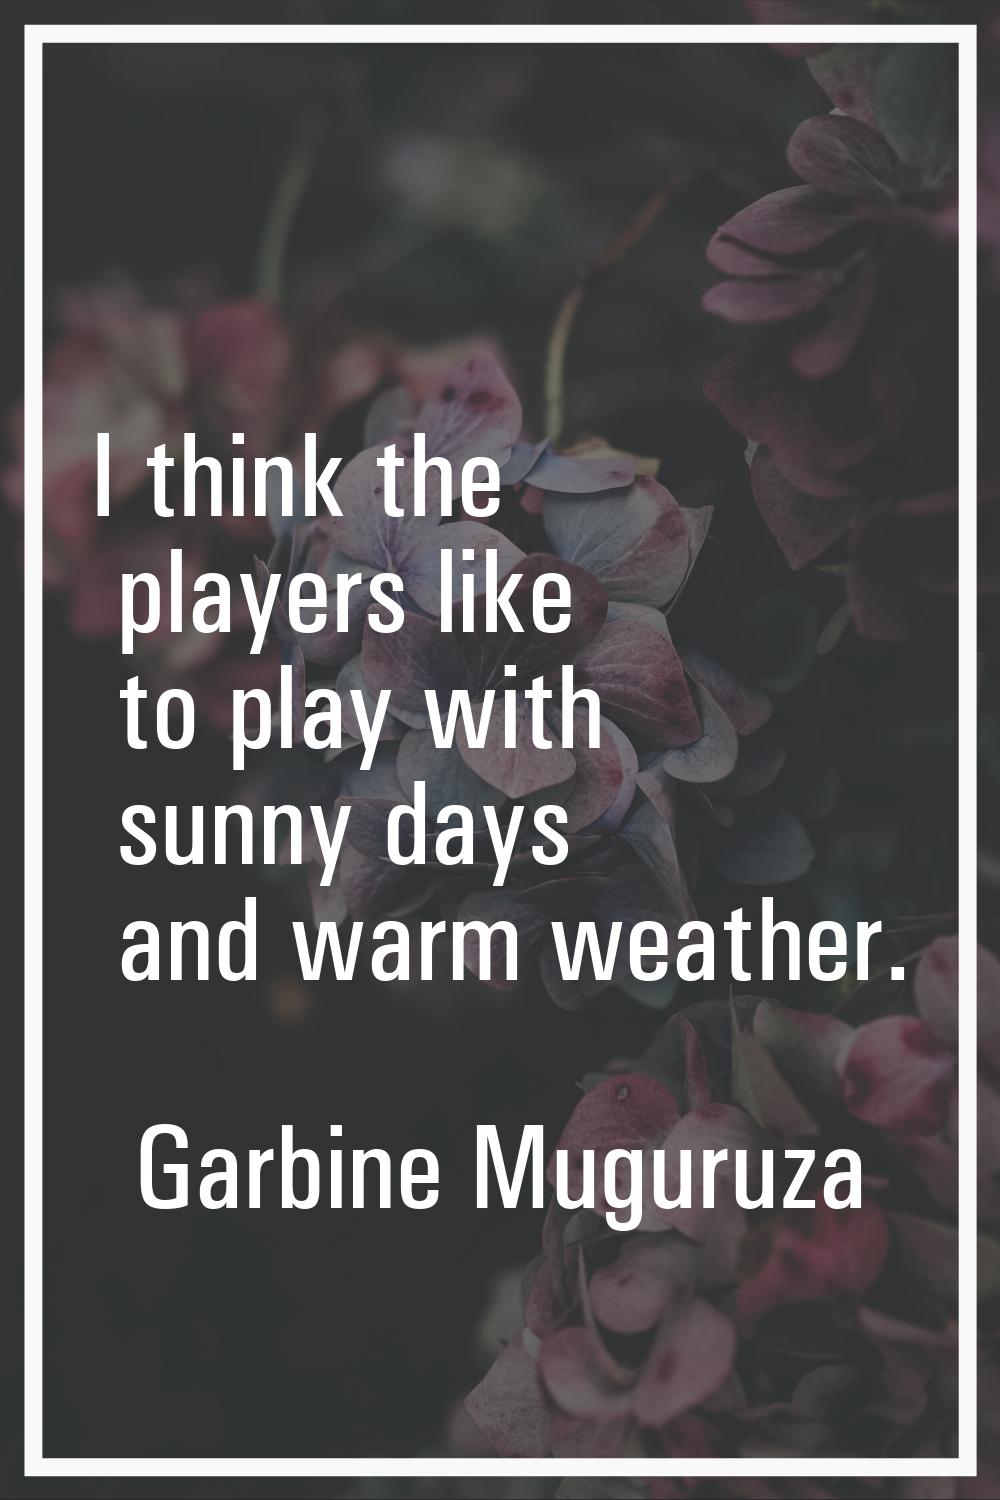 I think the players like to play with sunny days and warm weather.